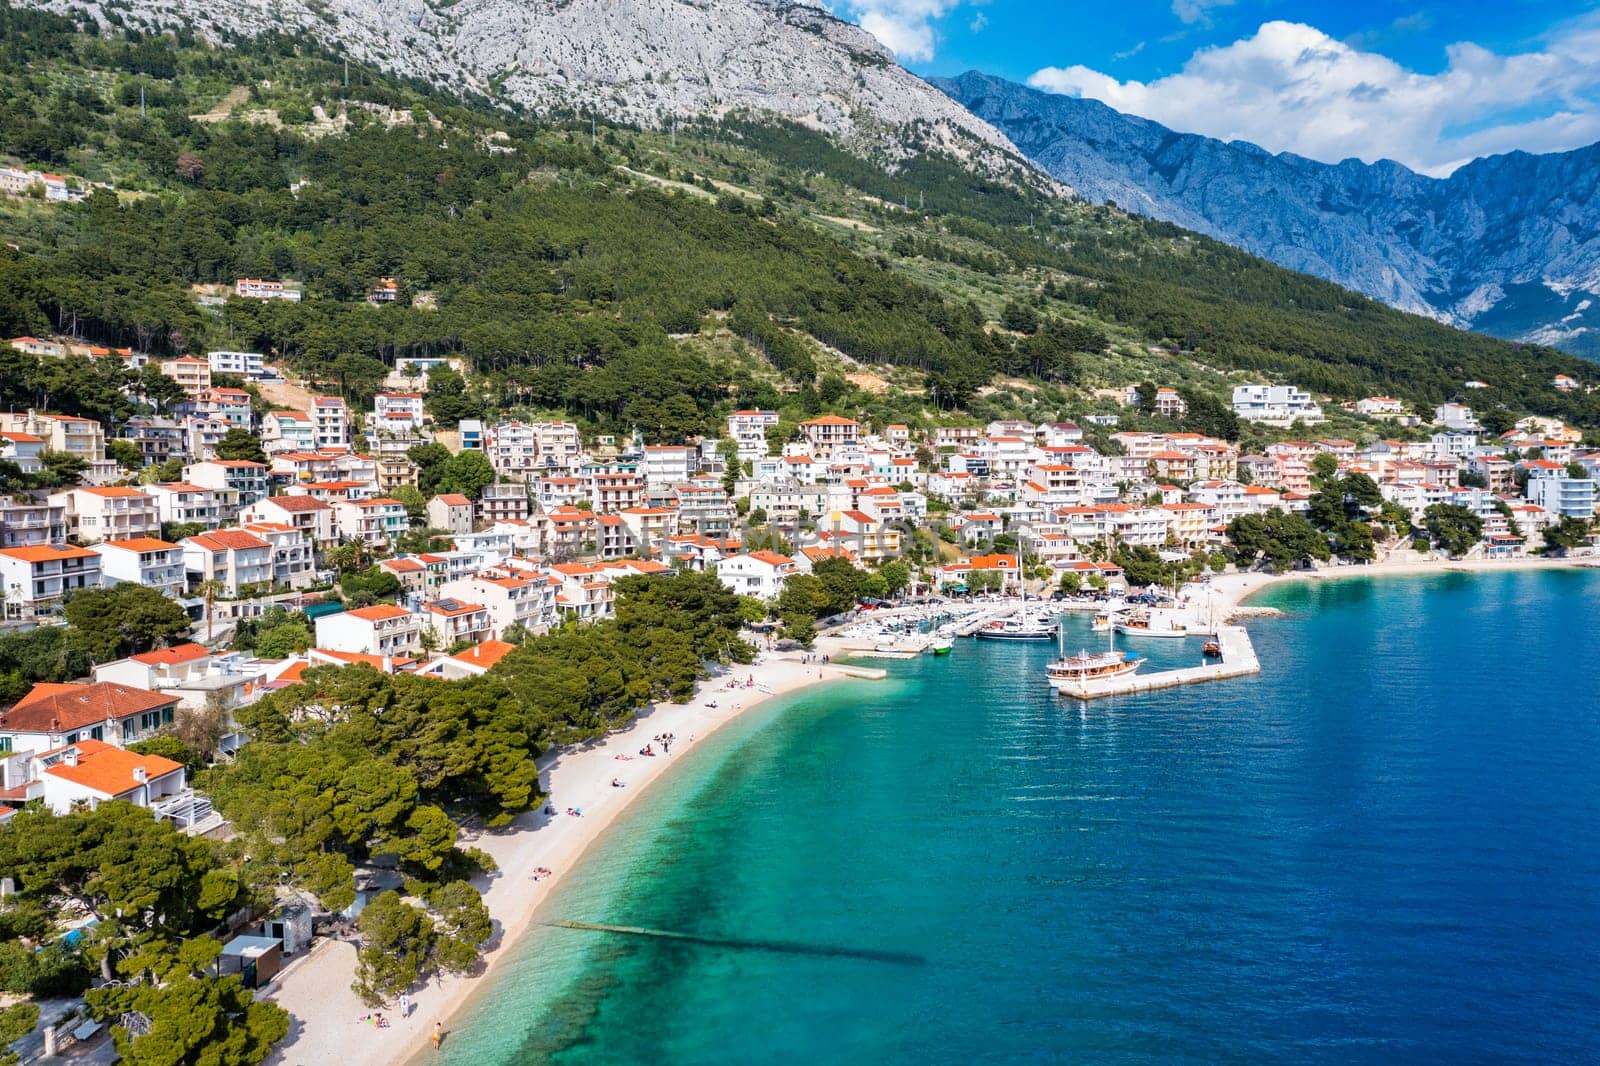 Beautiful Brela on Makarska riviera, Croatia. Adriatic Sea with amazing turquoise clean water and white sand. Aerial view of Brela town and waterfront on Makarska riviera, Dalmatia region of Croatia. by DaLiu